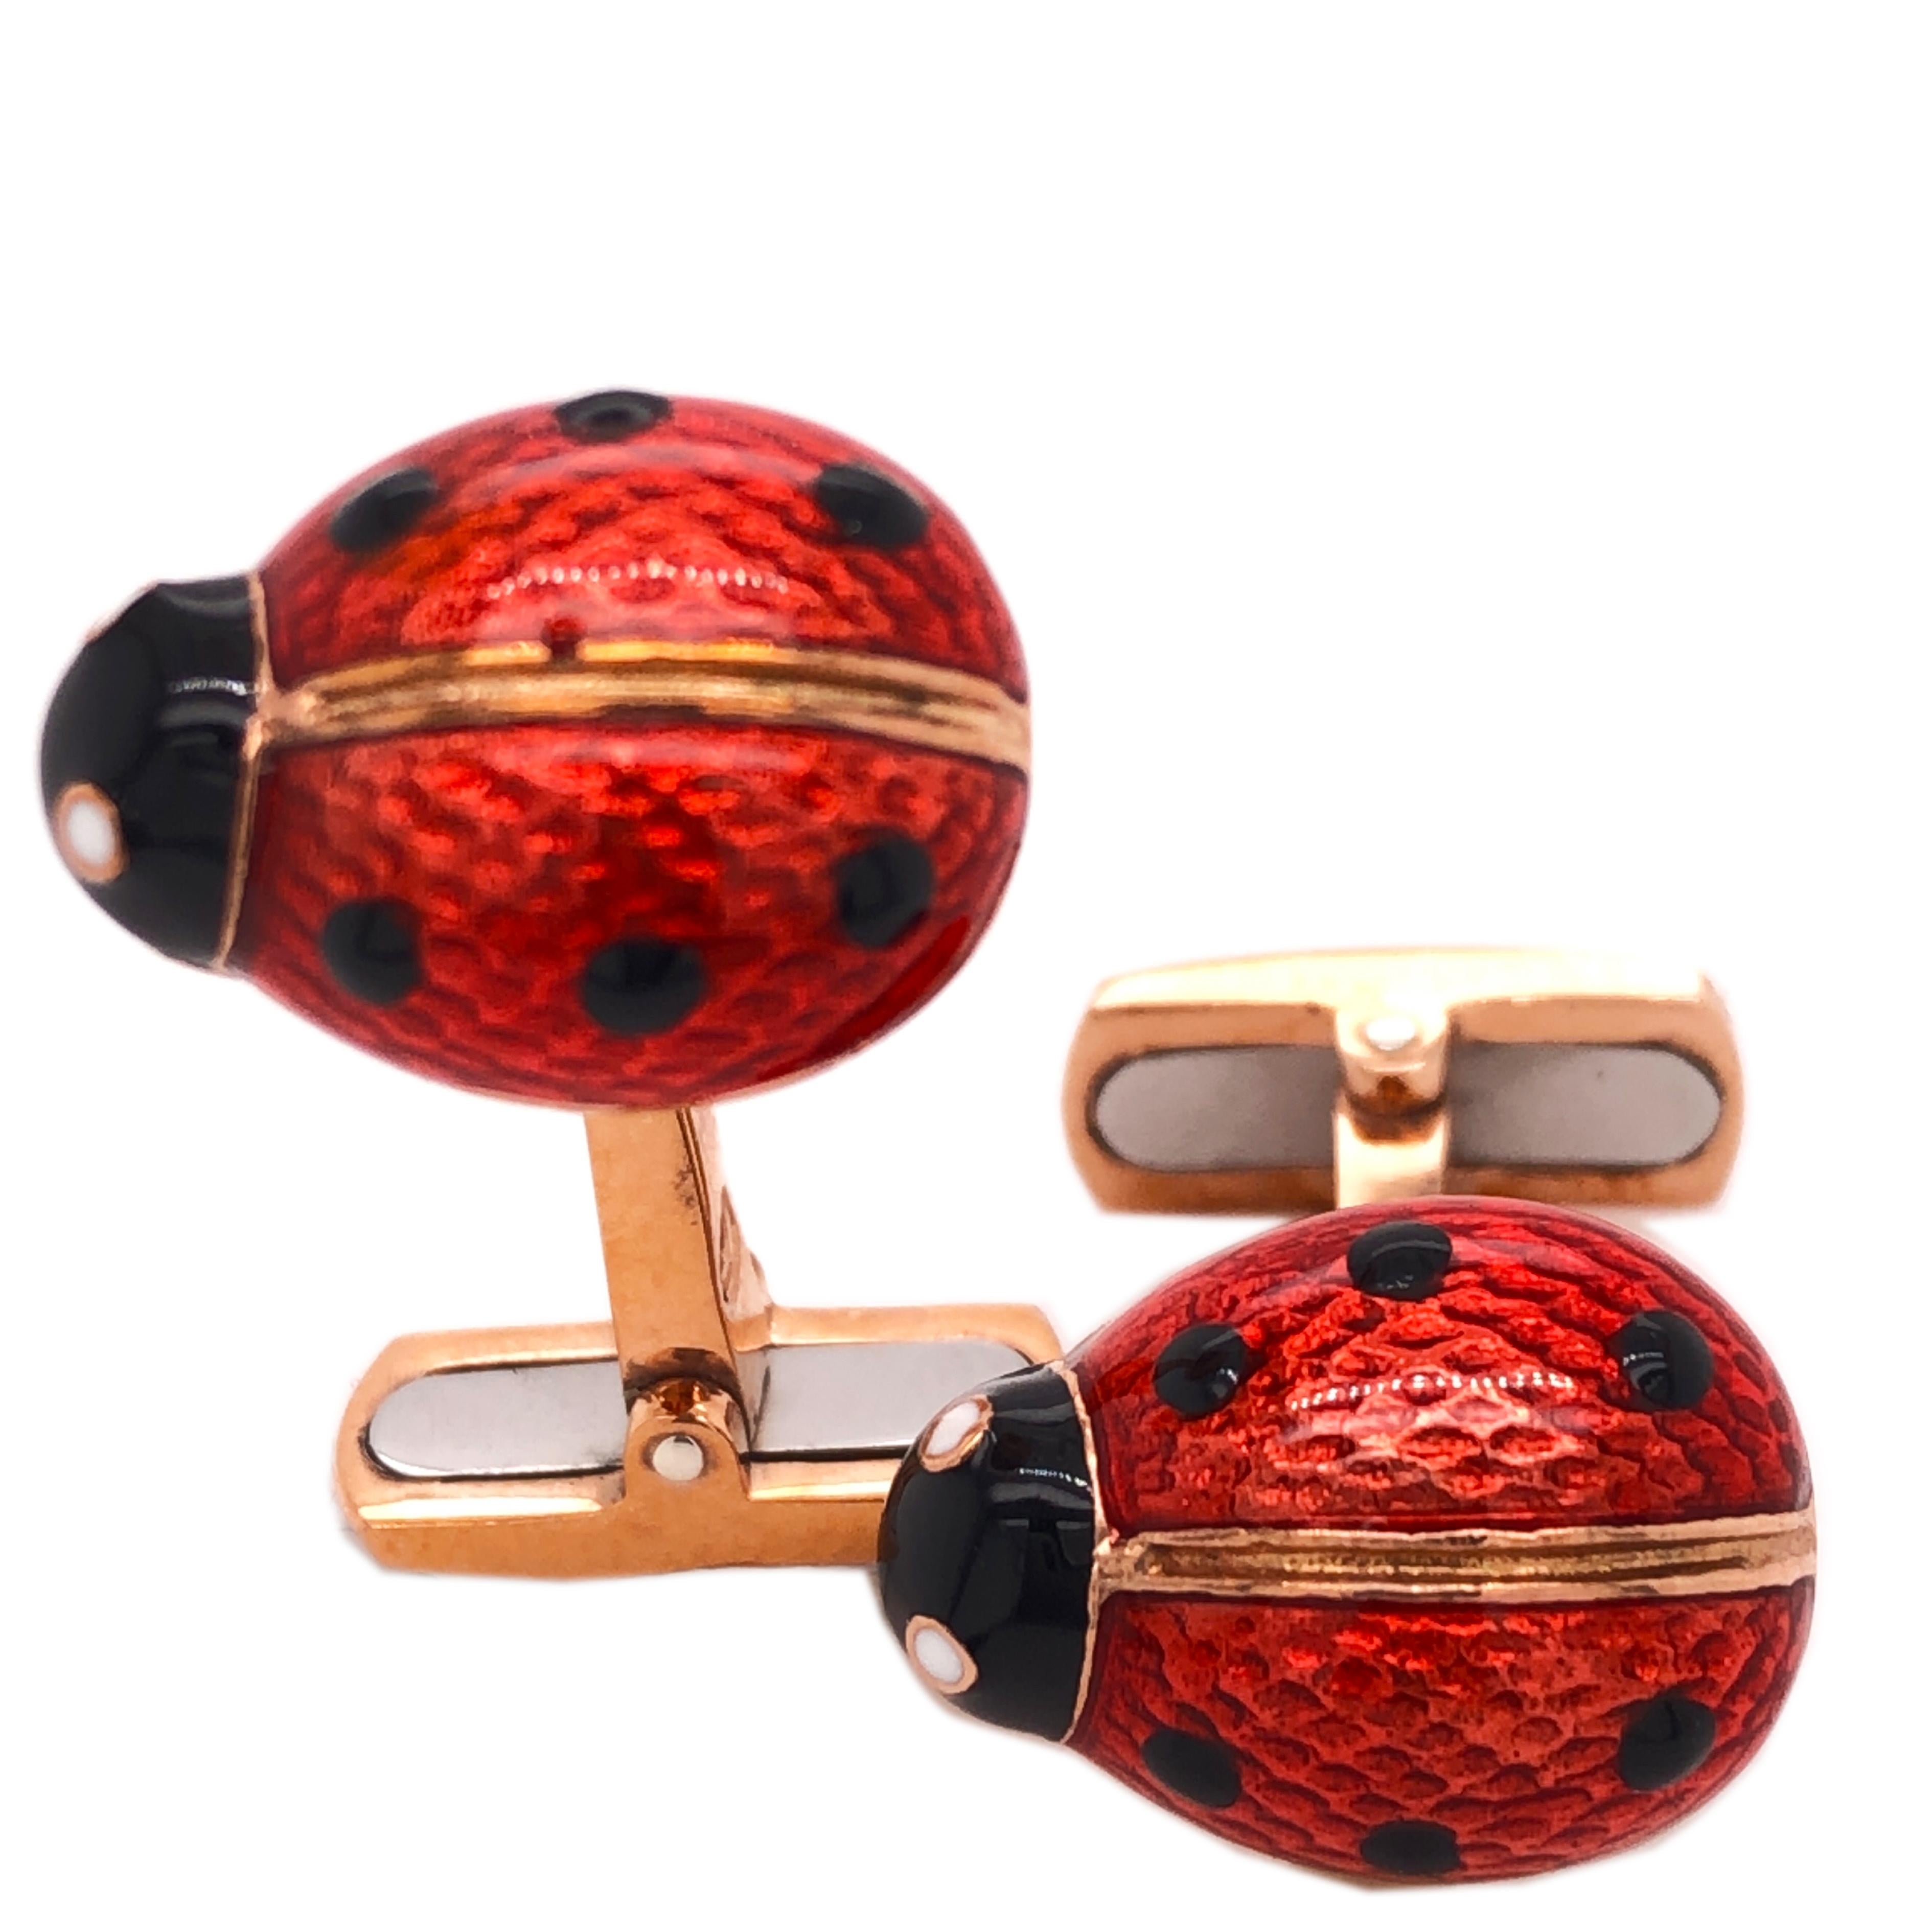 Chic, Timeless, but not Traditional Red Black Spotted Hand Enameled Little Ladybug Shaped  T-Bar Back, Rose Gold Setting Cufflinks.
In a smart Tobacco Leather Case and Pouch.



